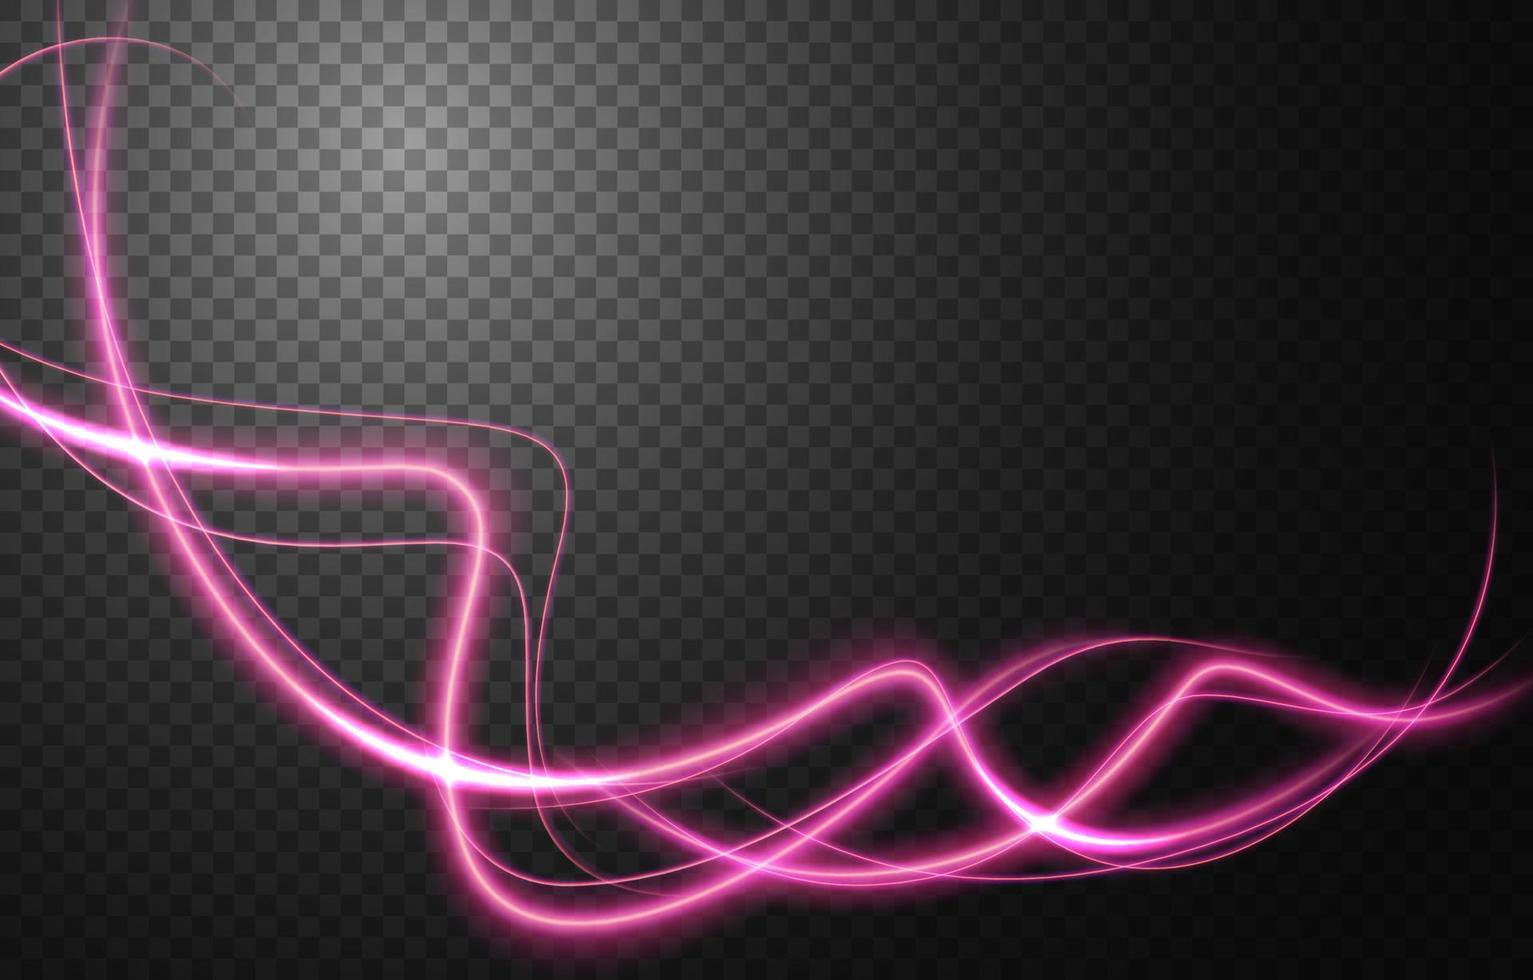 Abstract Light Speed Motion Effect, Pink Light Trail. Vector Illustration